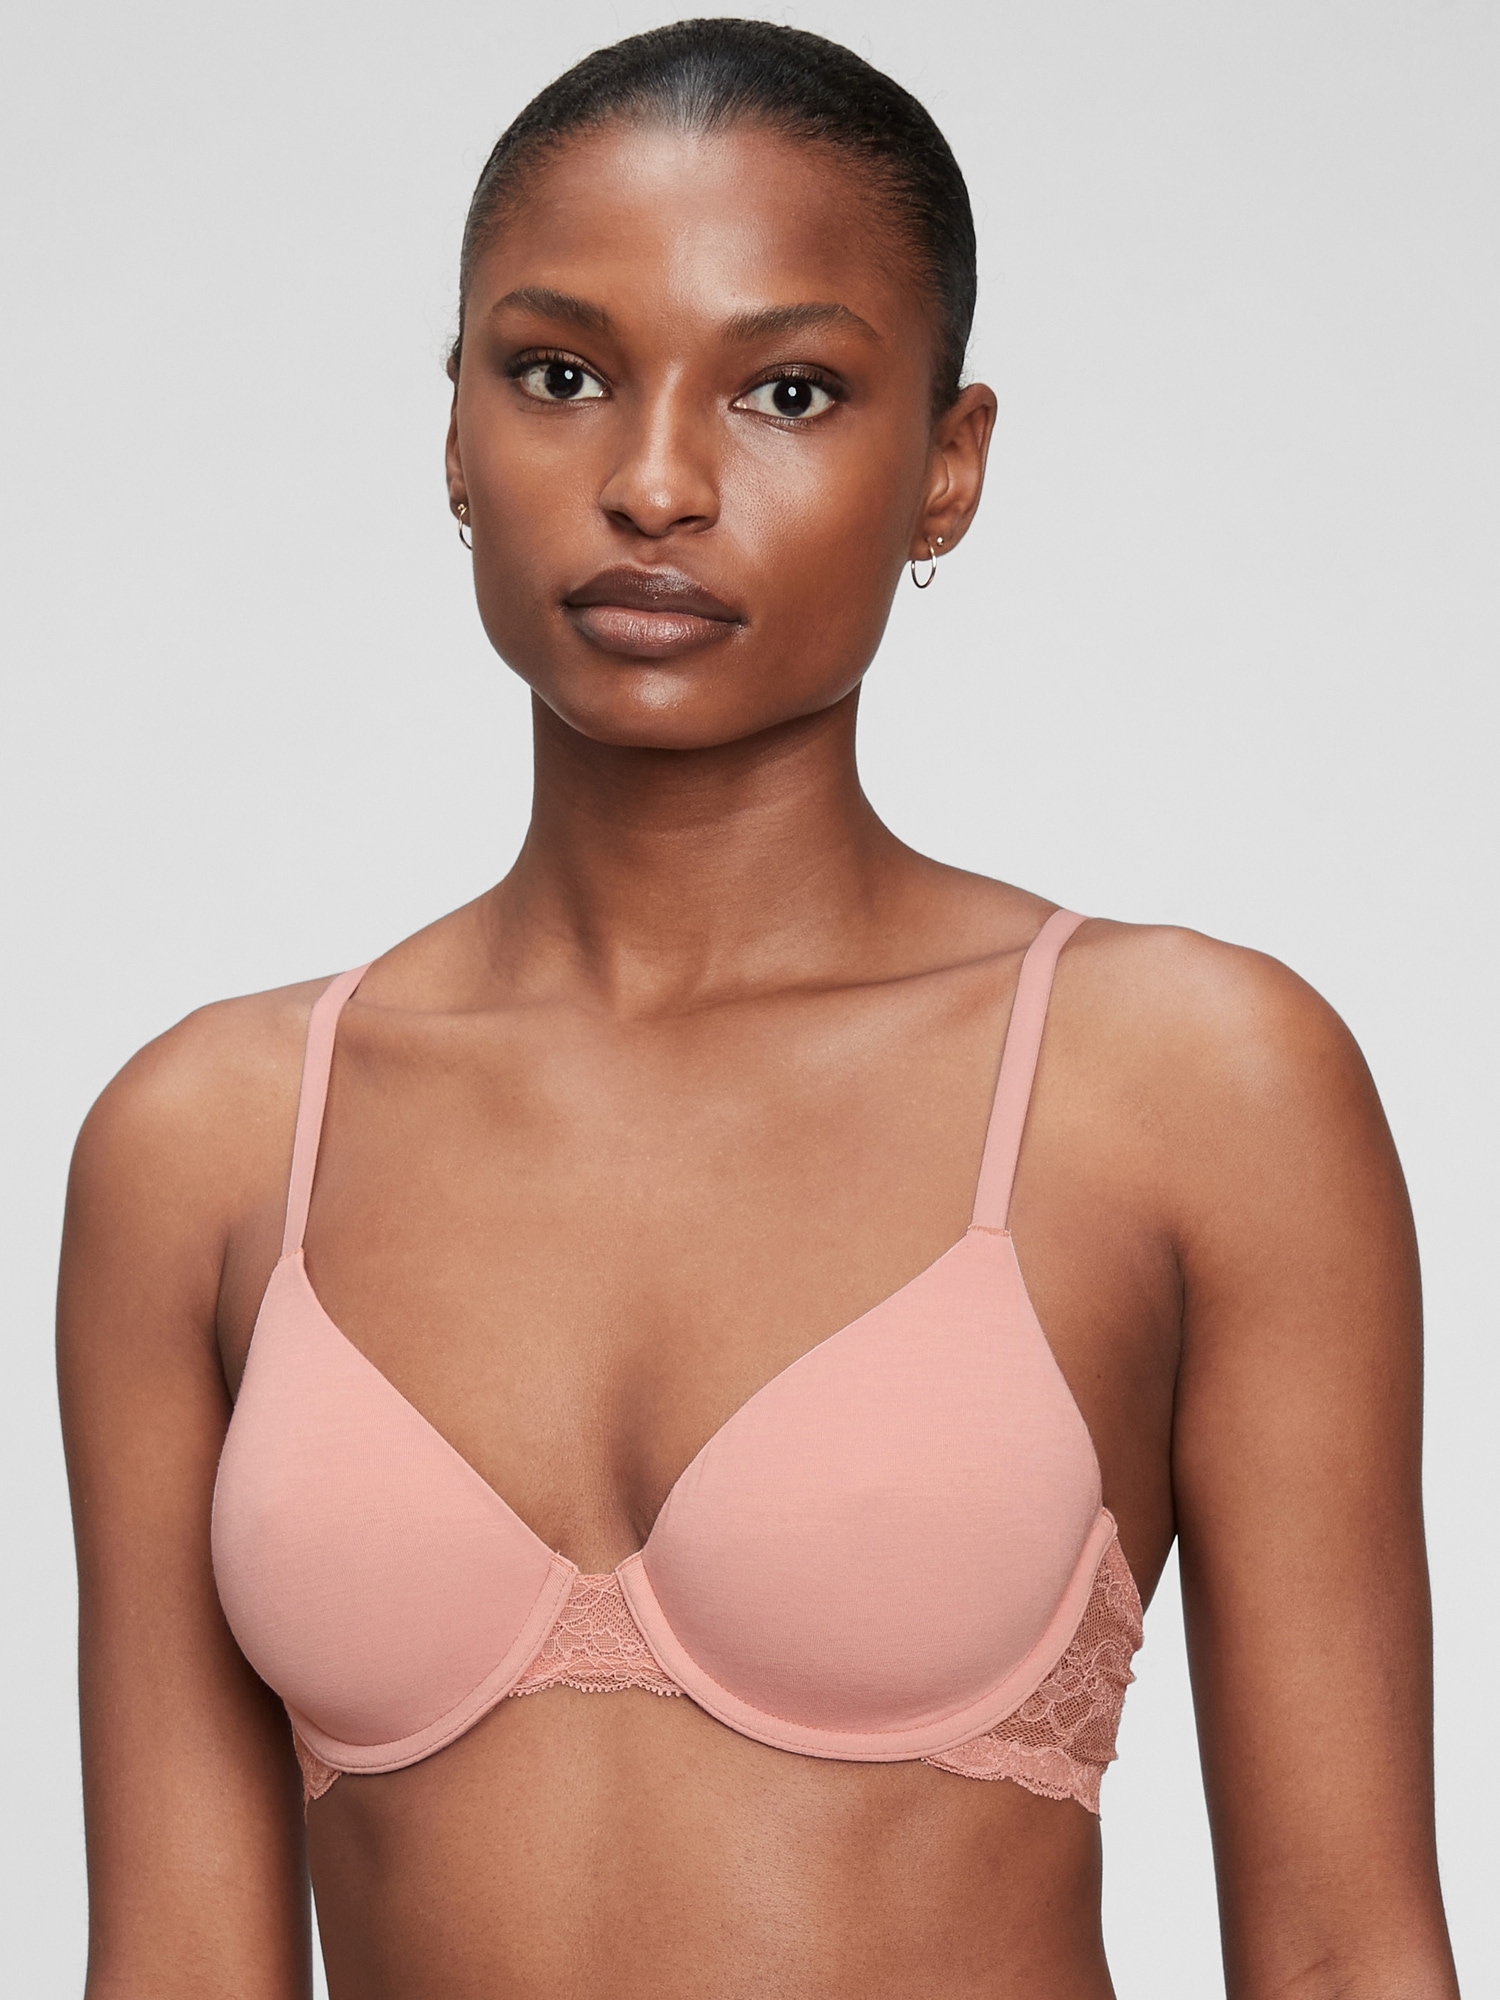 Pink Polyester and Cotton Ladies Transparent Strap Padded Bra